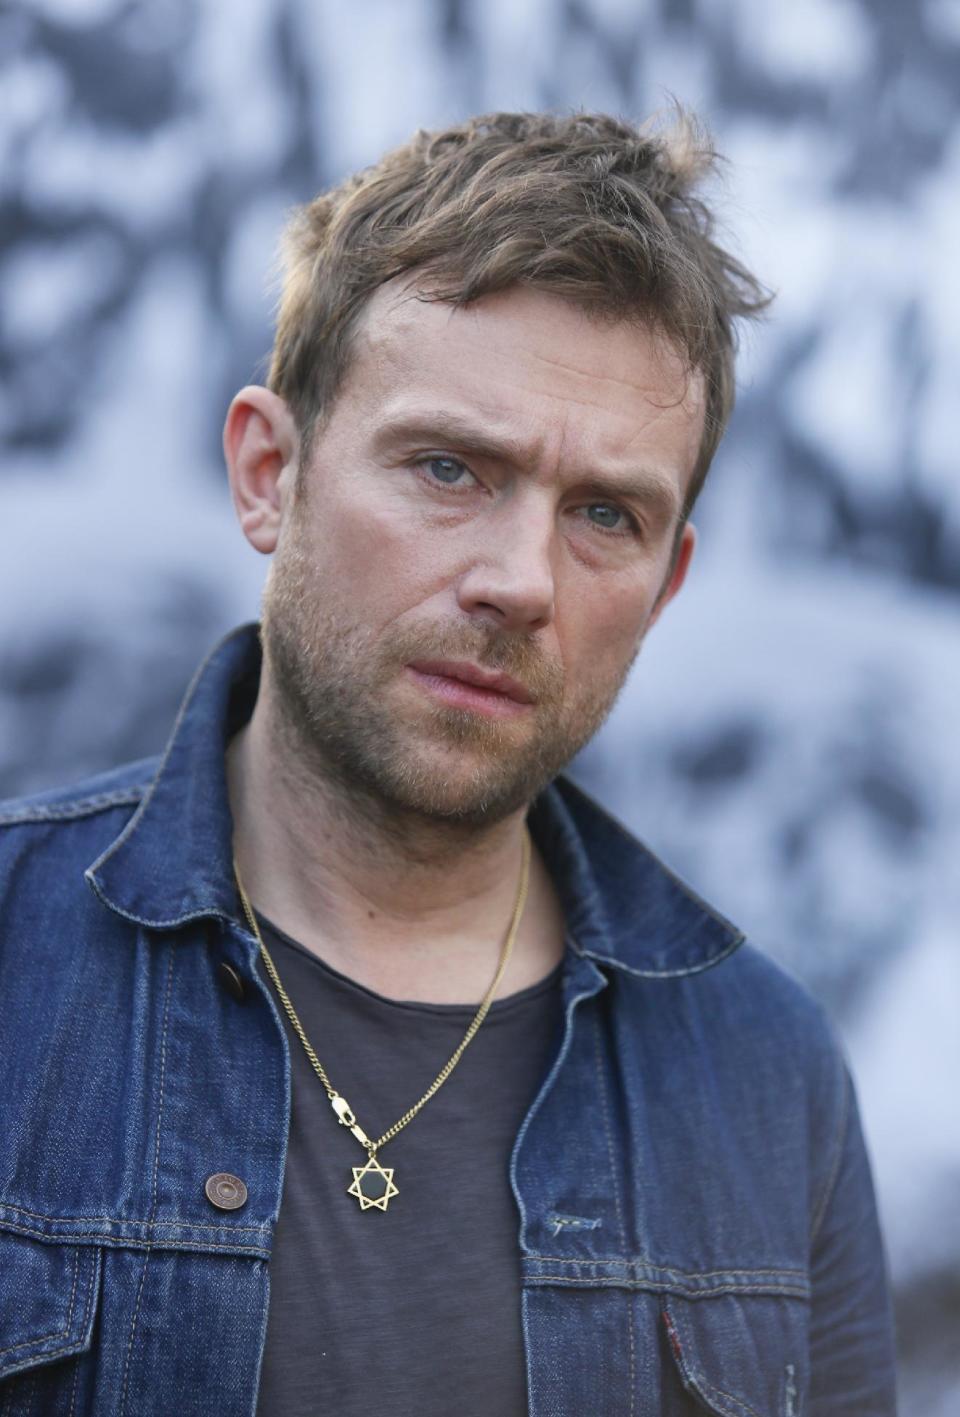 FILE - In this March 14, 2014 file photo, Damon Albarn poses for a photograph during the SXSW Music Festival, in Austin, Texas. Albarn's new album, "Everyday Robots," released on Monday, April 28, 2014. (Photo by Jack Plunkett/Invision/AP, file)